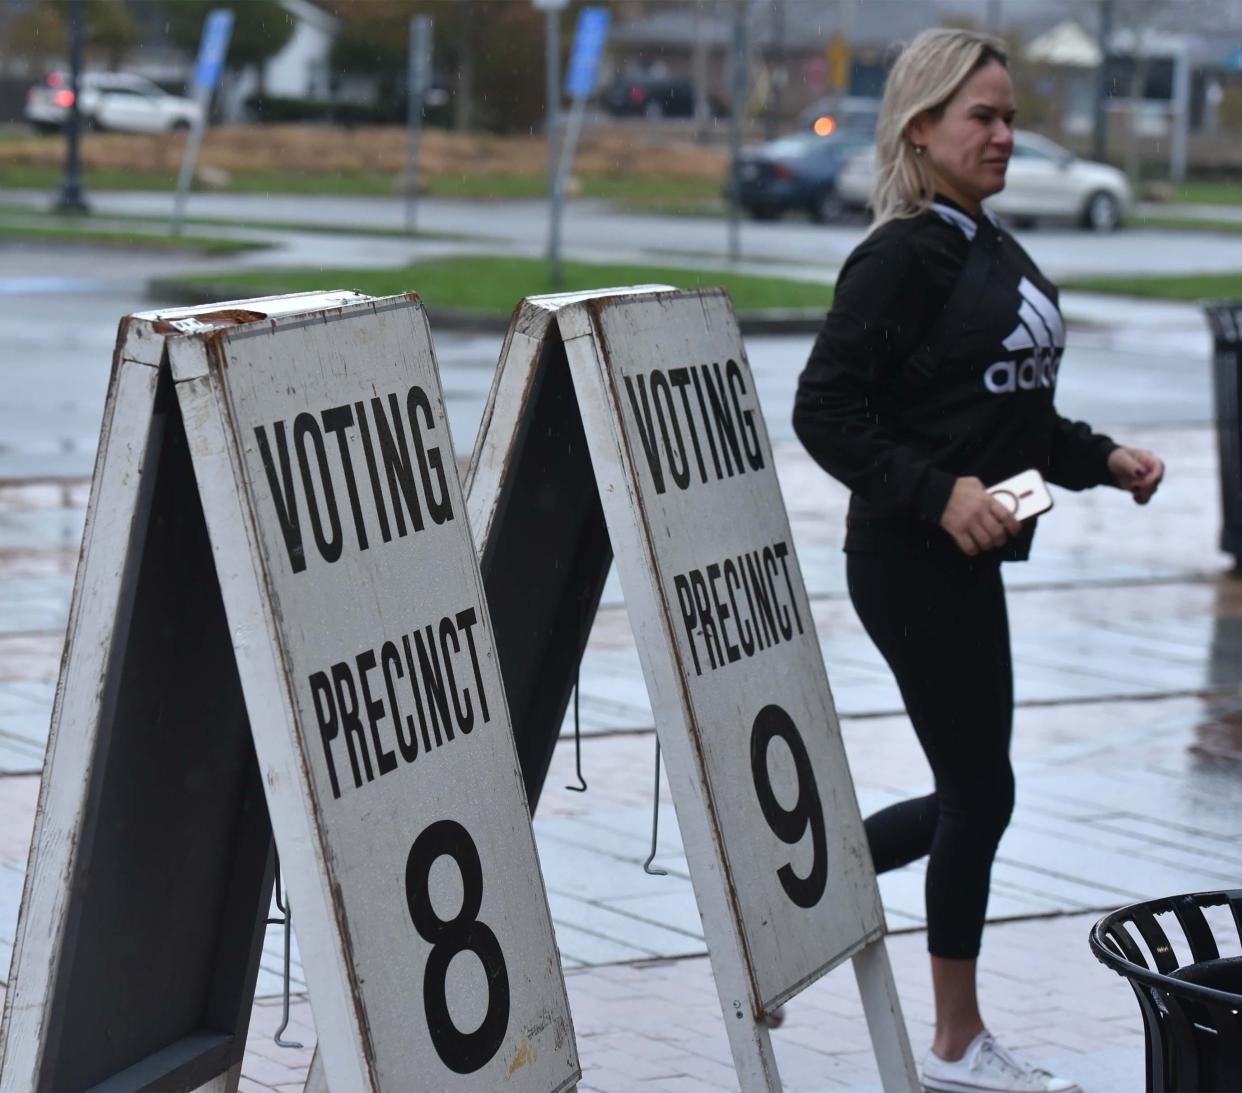 Dodging the raindrops right after the polls opened at the Hyannis Youth and Community Center on Election Day for the Town of Barnstable for voters in precincts 8,9, and 13.